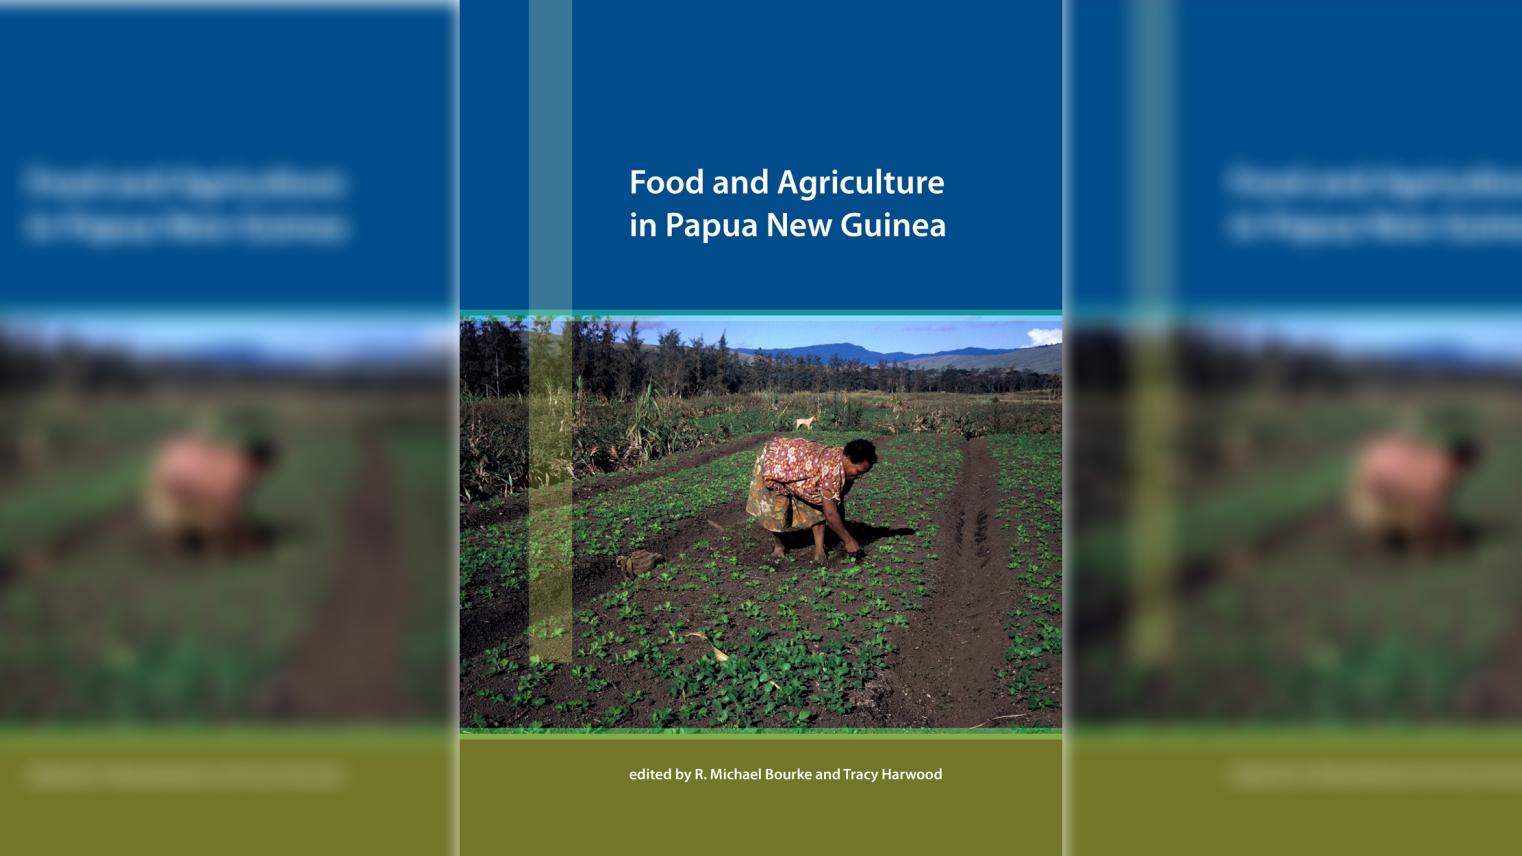 Food and Agriculture in Papua New Guinea